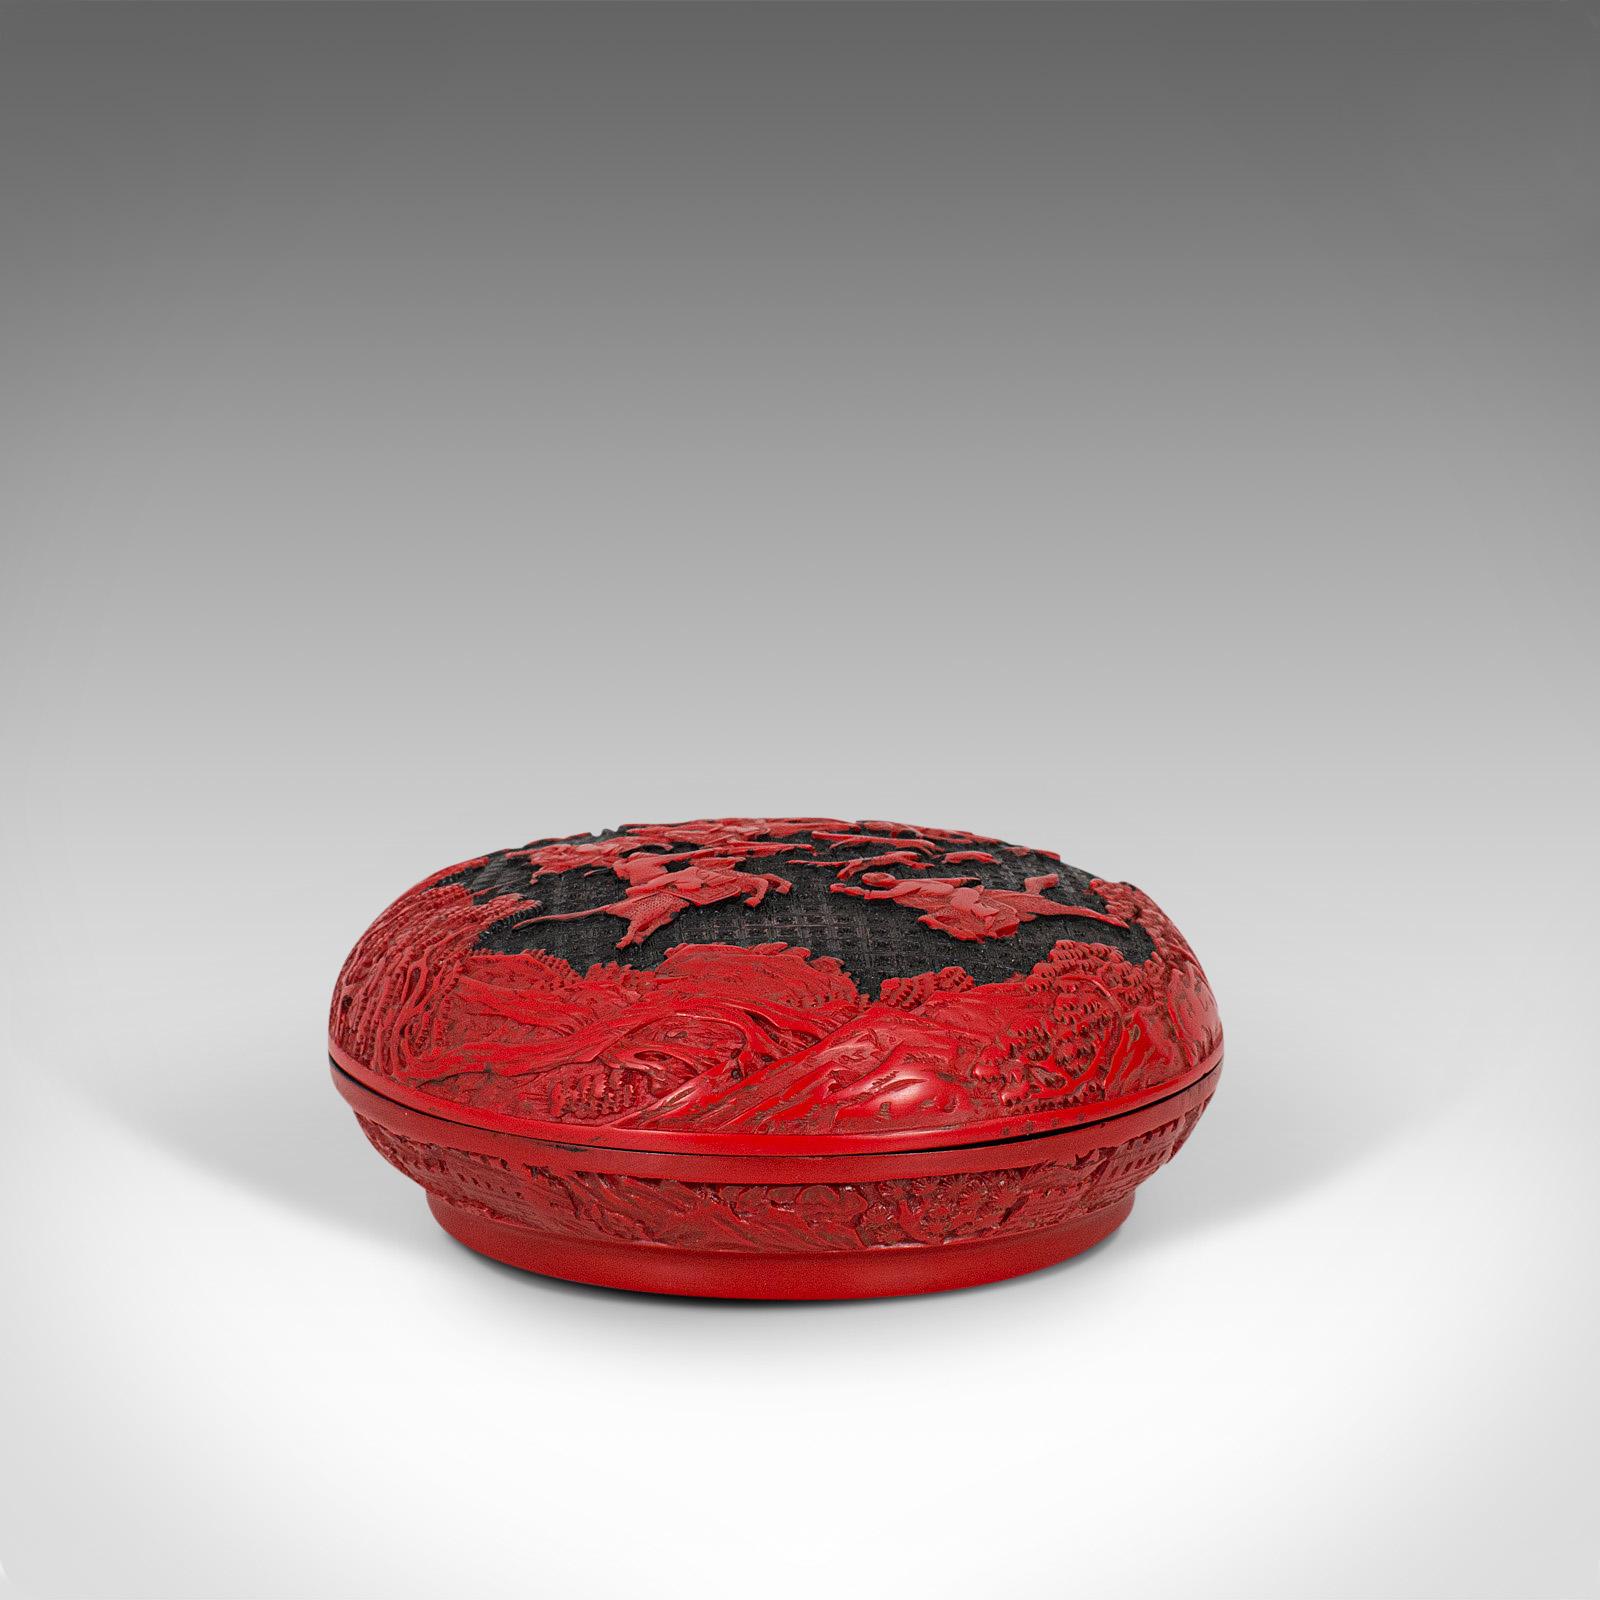 19th Century Antique Cinnabar Box, Chinese, Lacquer, Decorative Tray, Qing Dynasty circa 1900